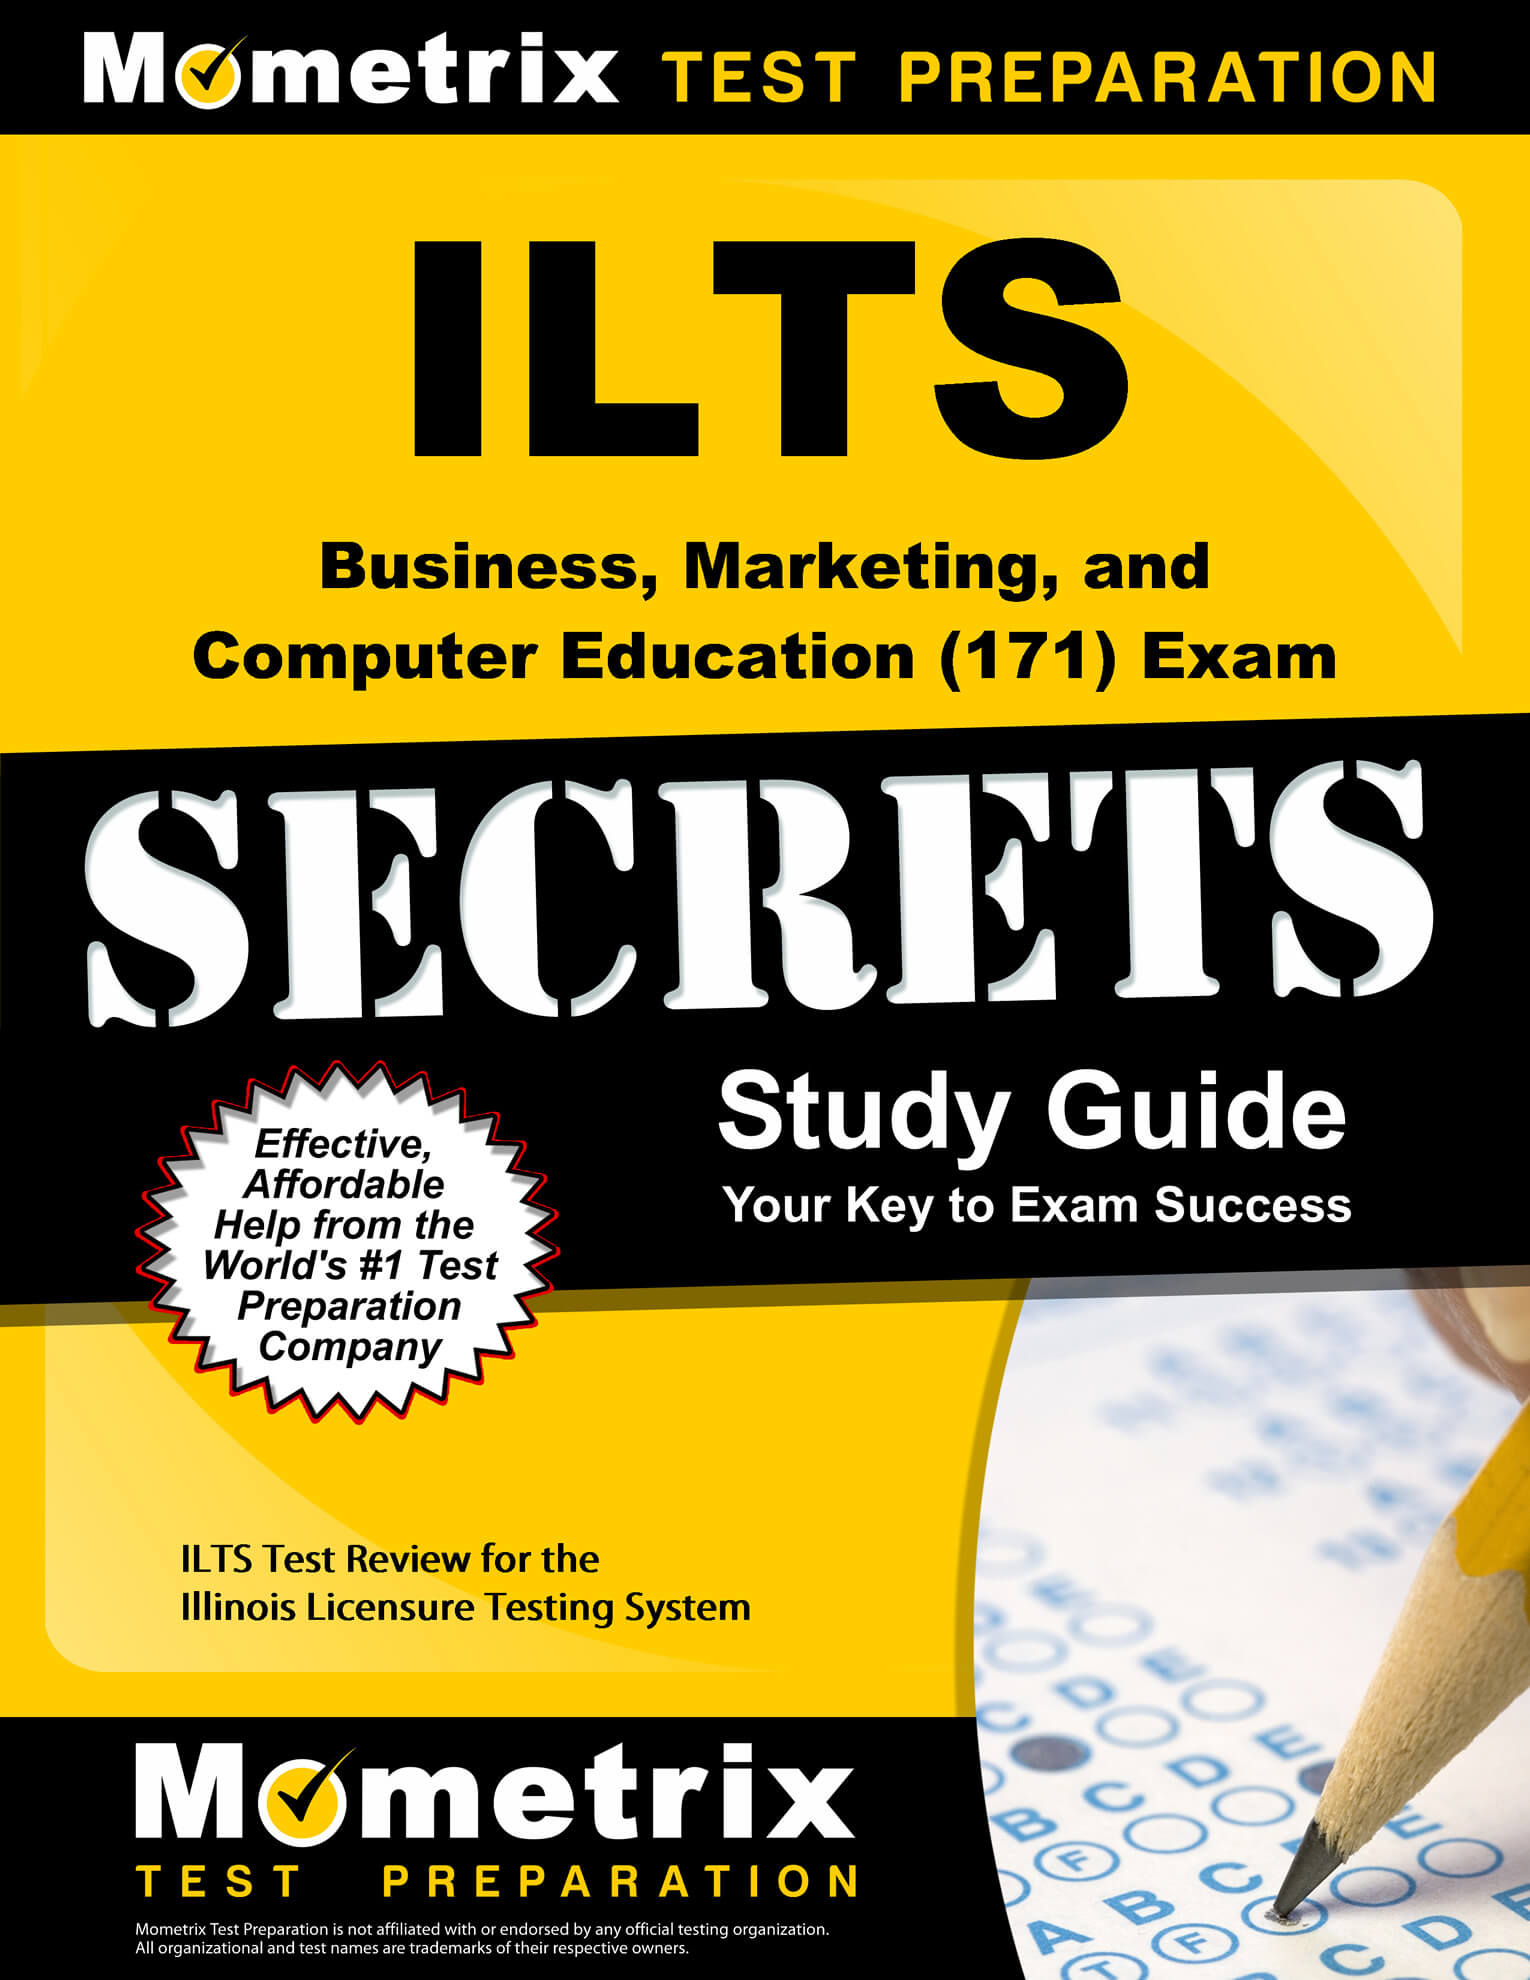 ILTS Business, Marketing, and Computer Education Study Guide